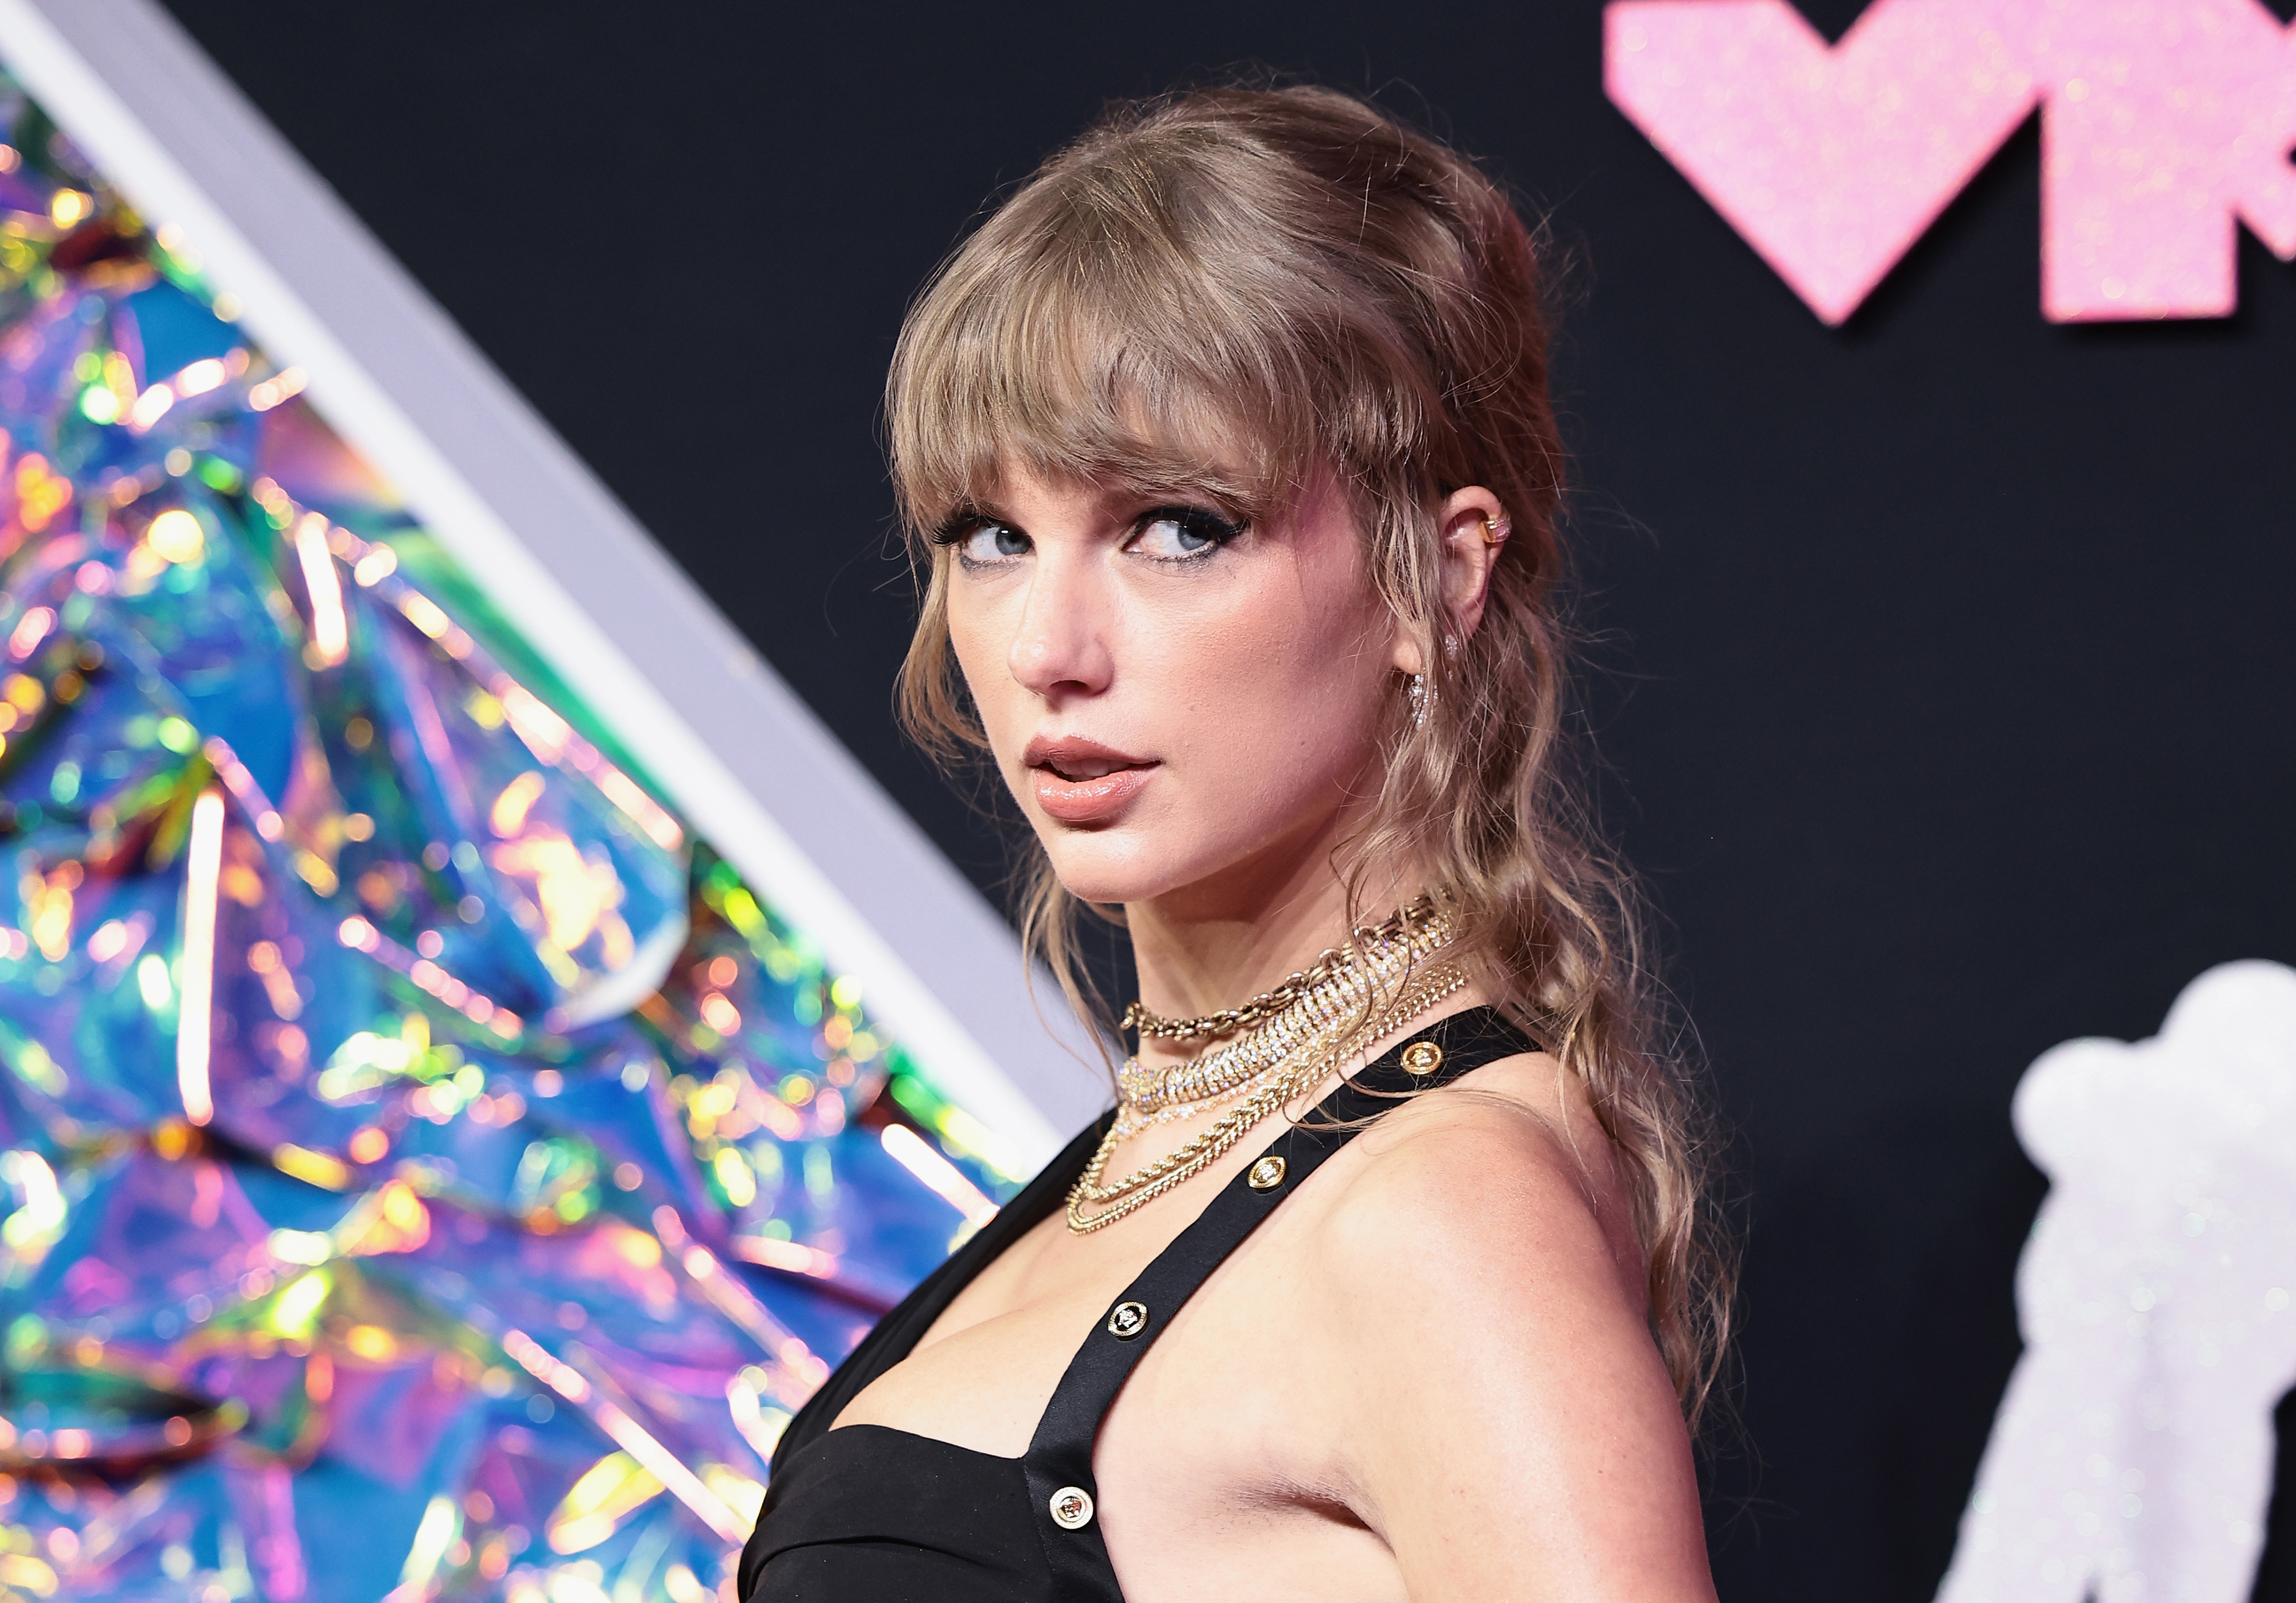 Taylor Swift at an event, wearing a black outfit with a gold chain necklace